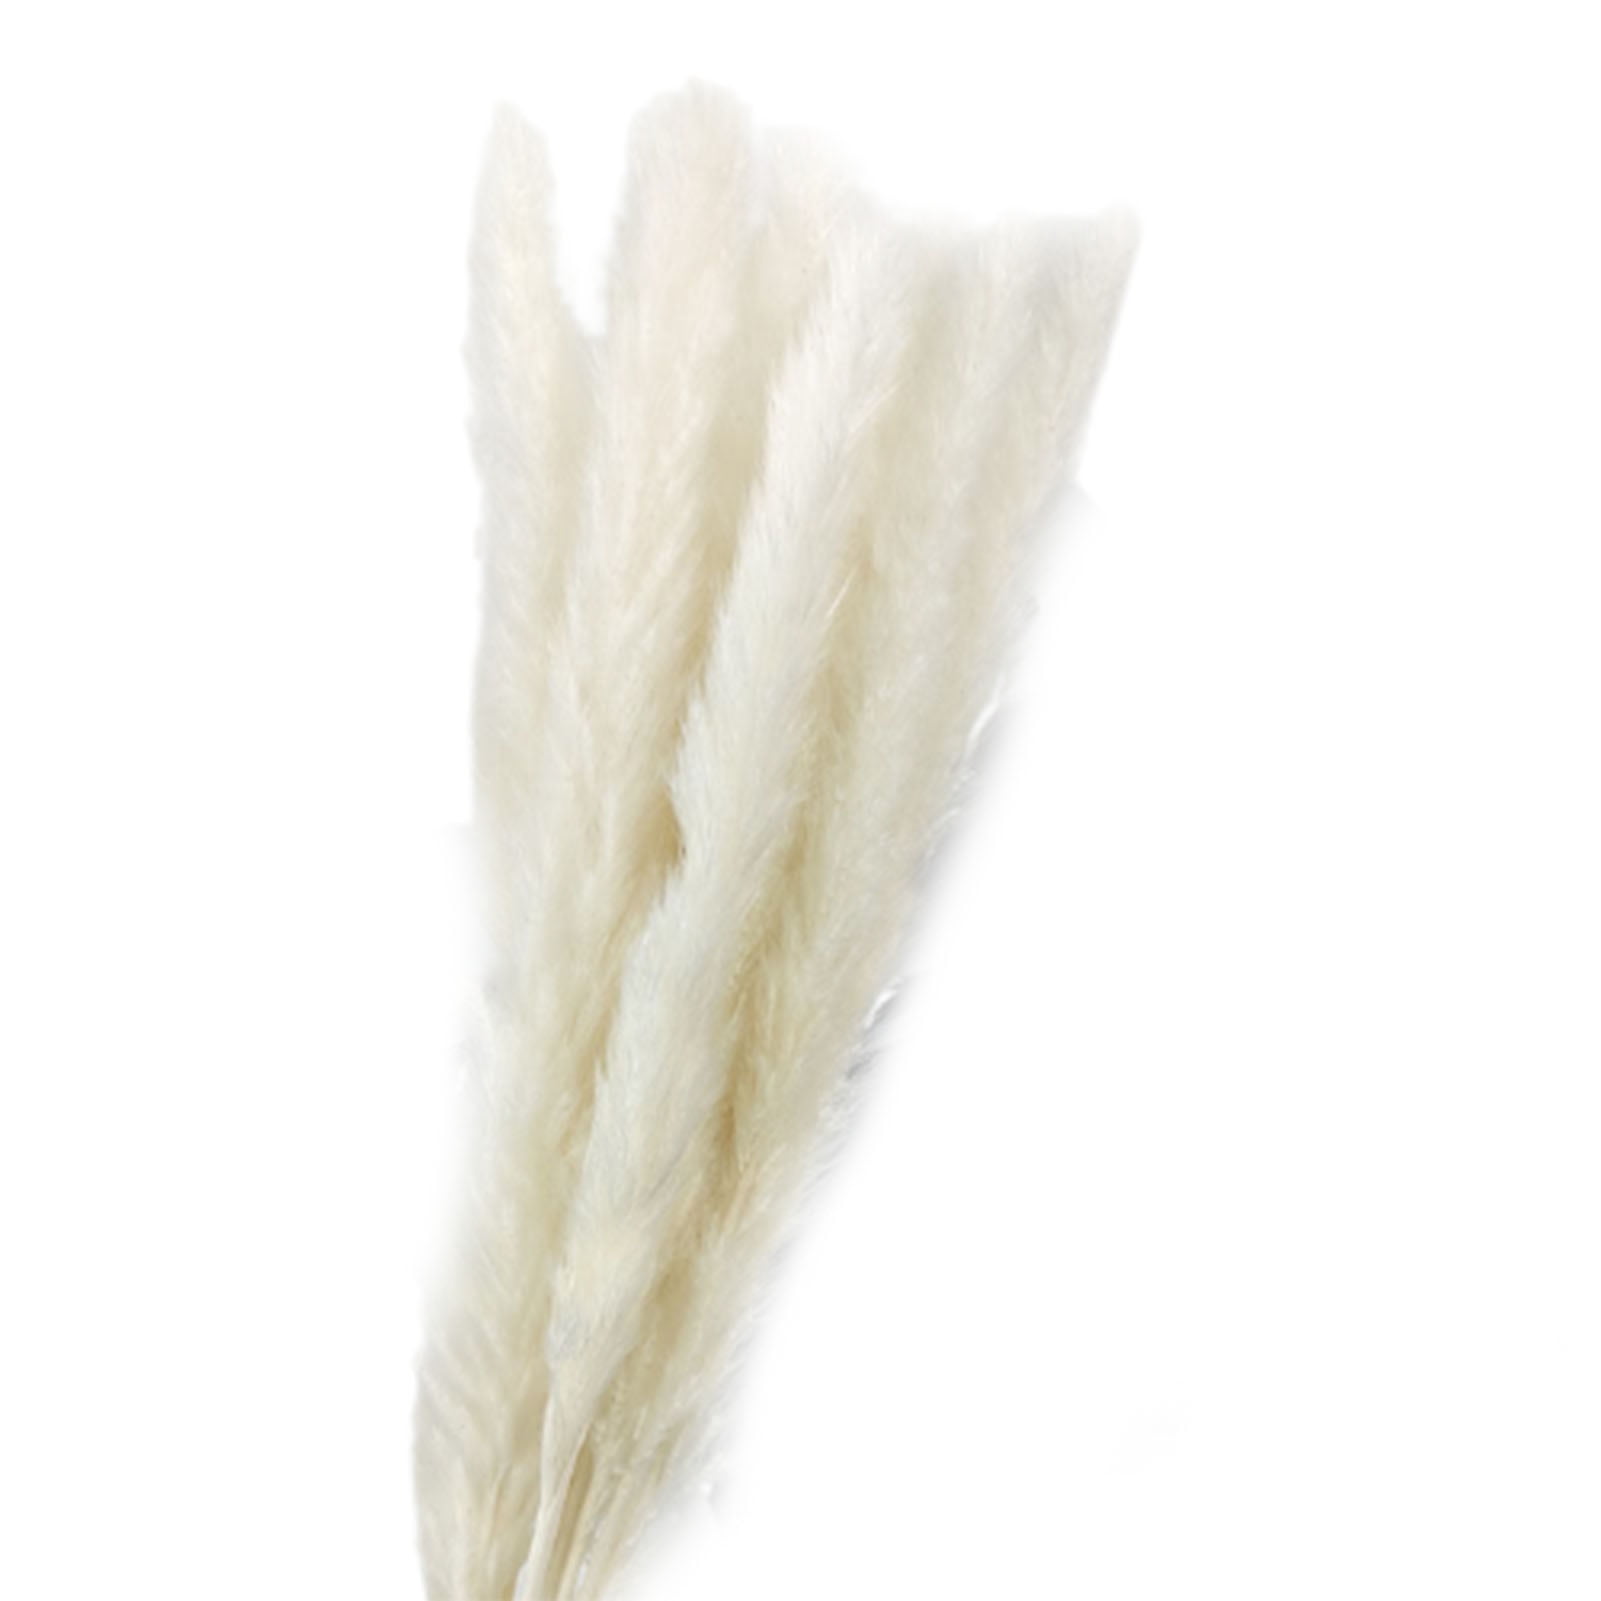 Natural Dried-Pampas Grass Gray Reed Flower Bunch Bouquet Wedding Party Decor